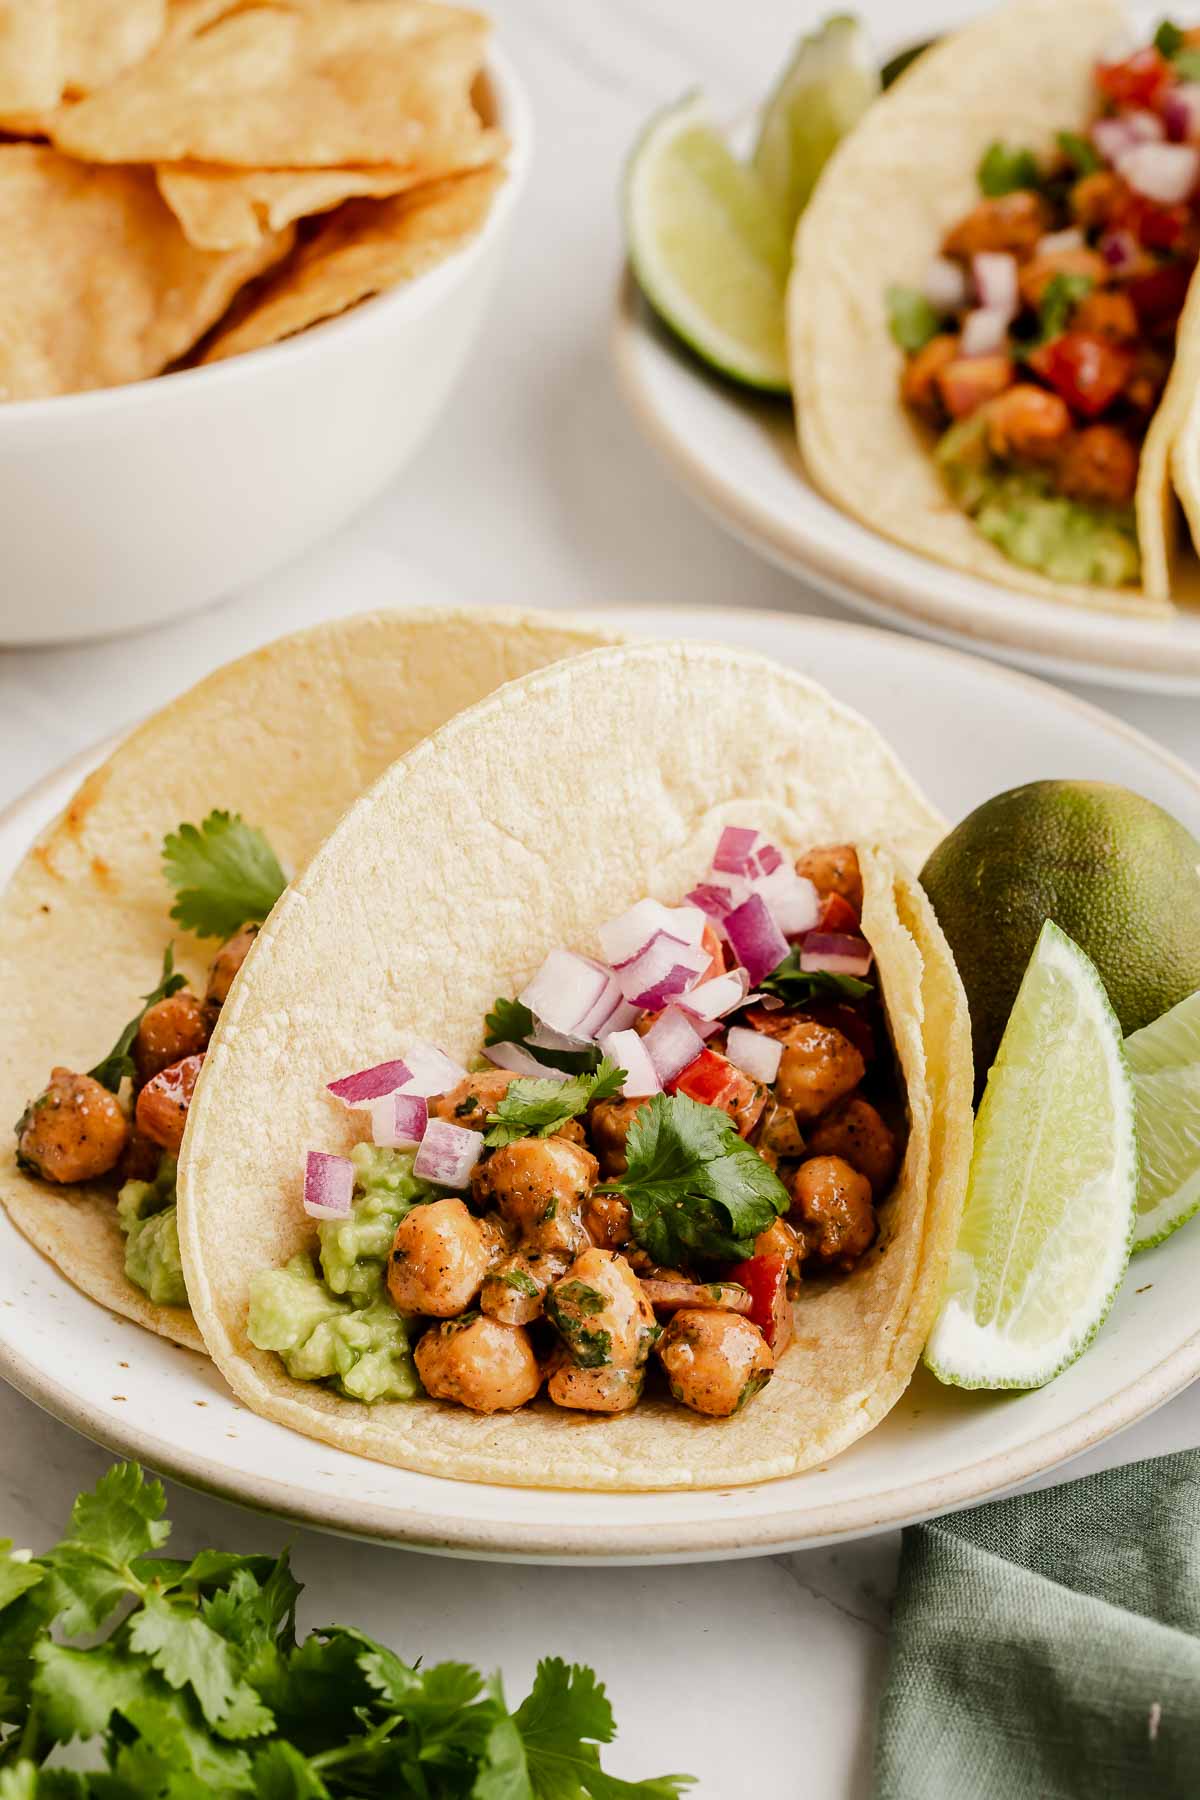 Two chickpea tacos on a plate with sliced lime on side.